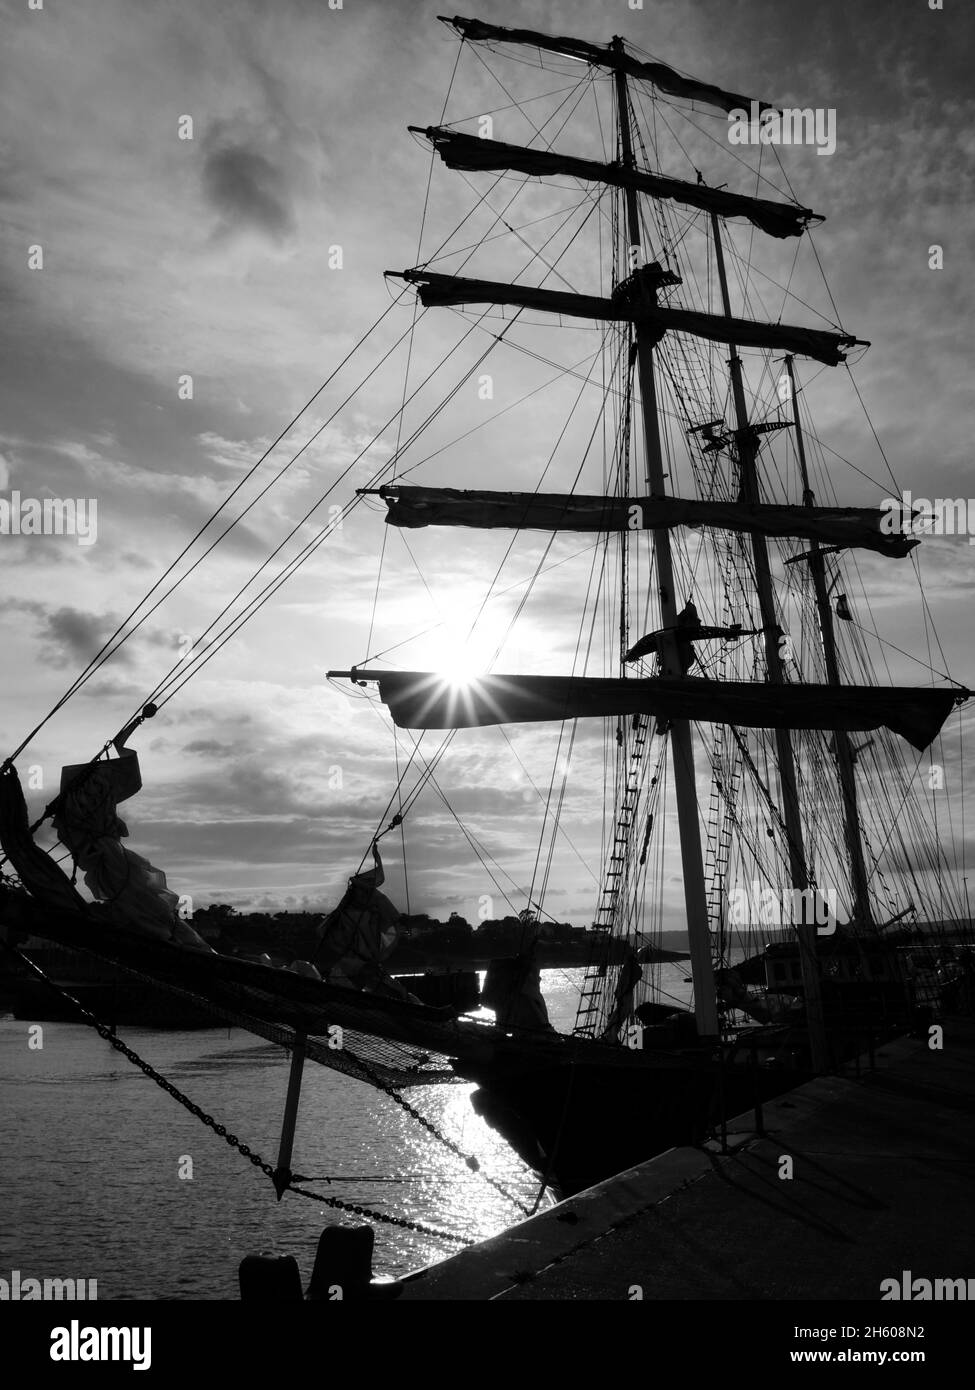 Silhouette of a classic ship in sunset light. High contrast black and white photograph. Stock Photo